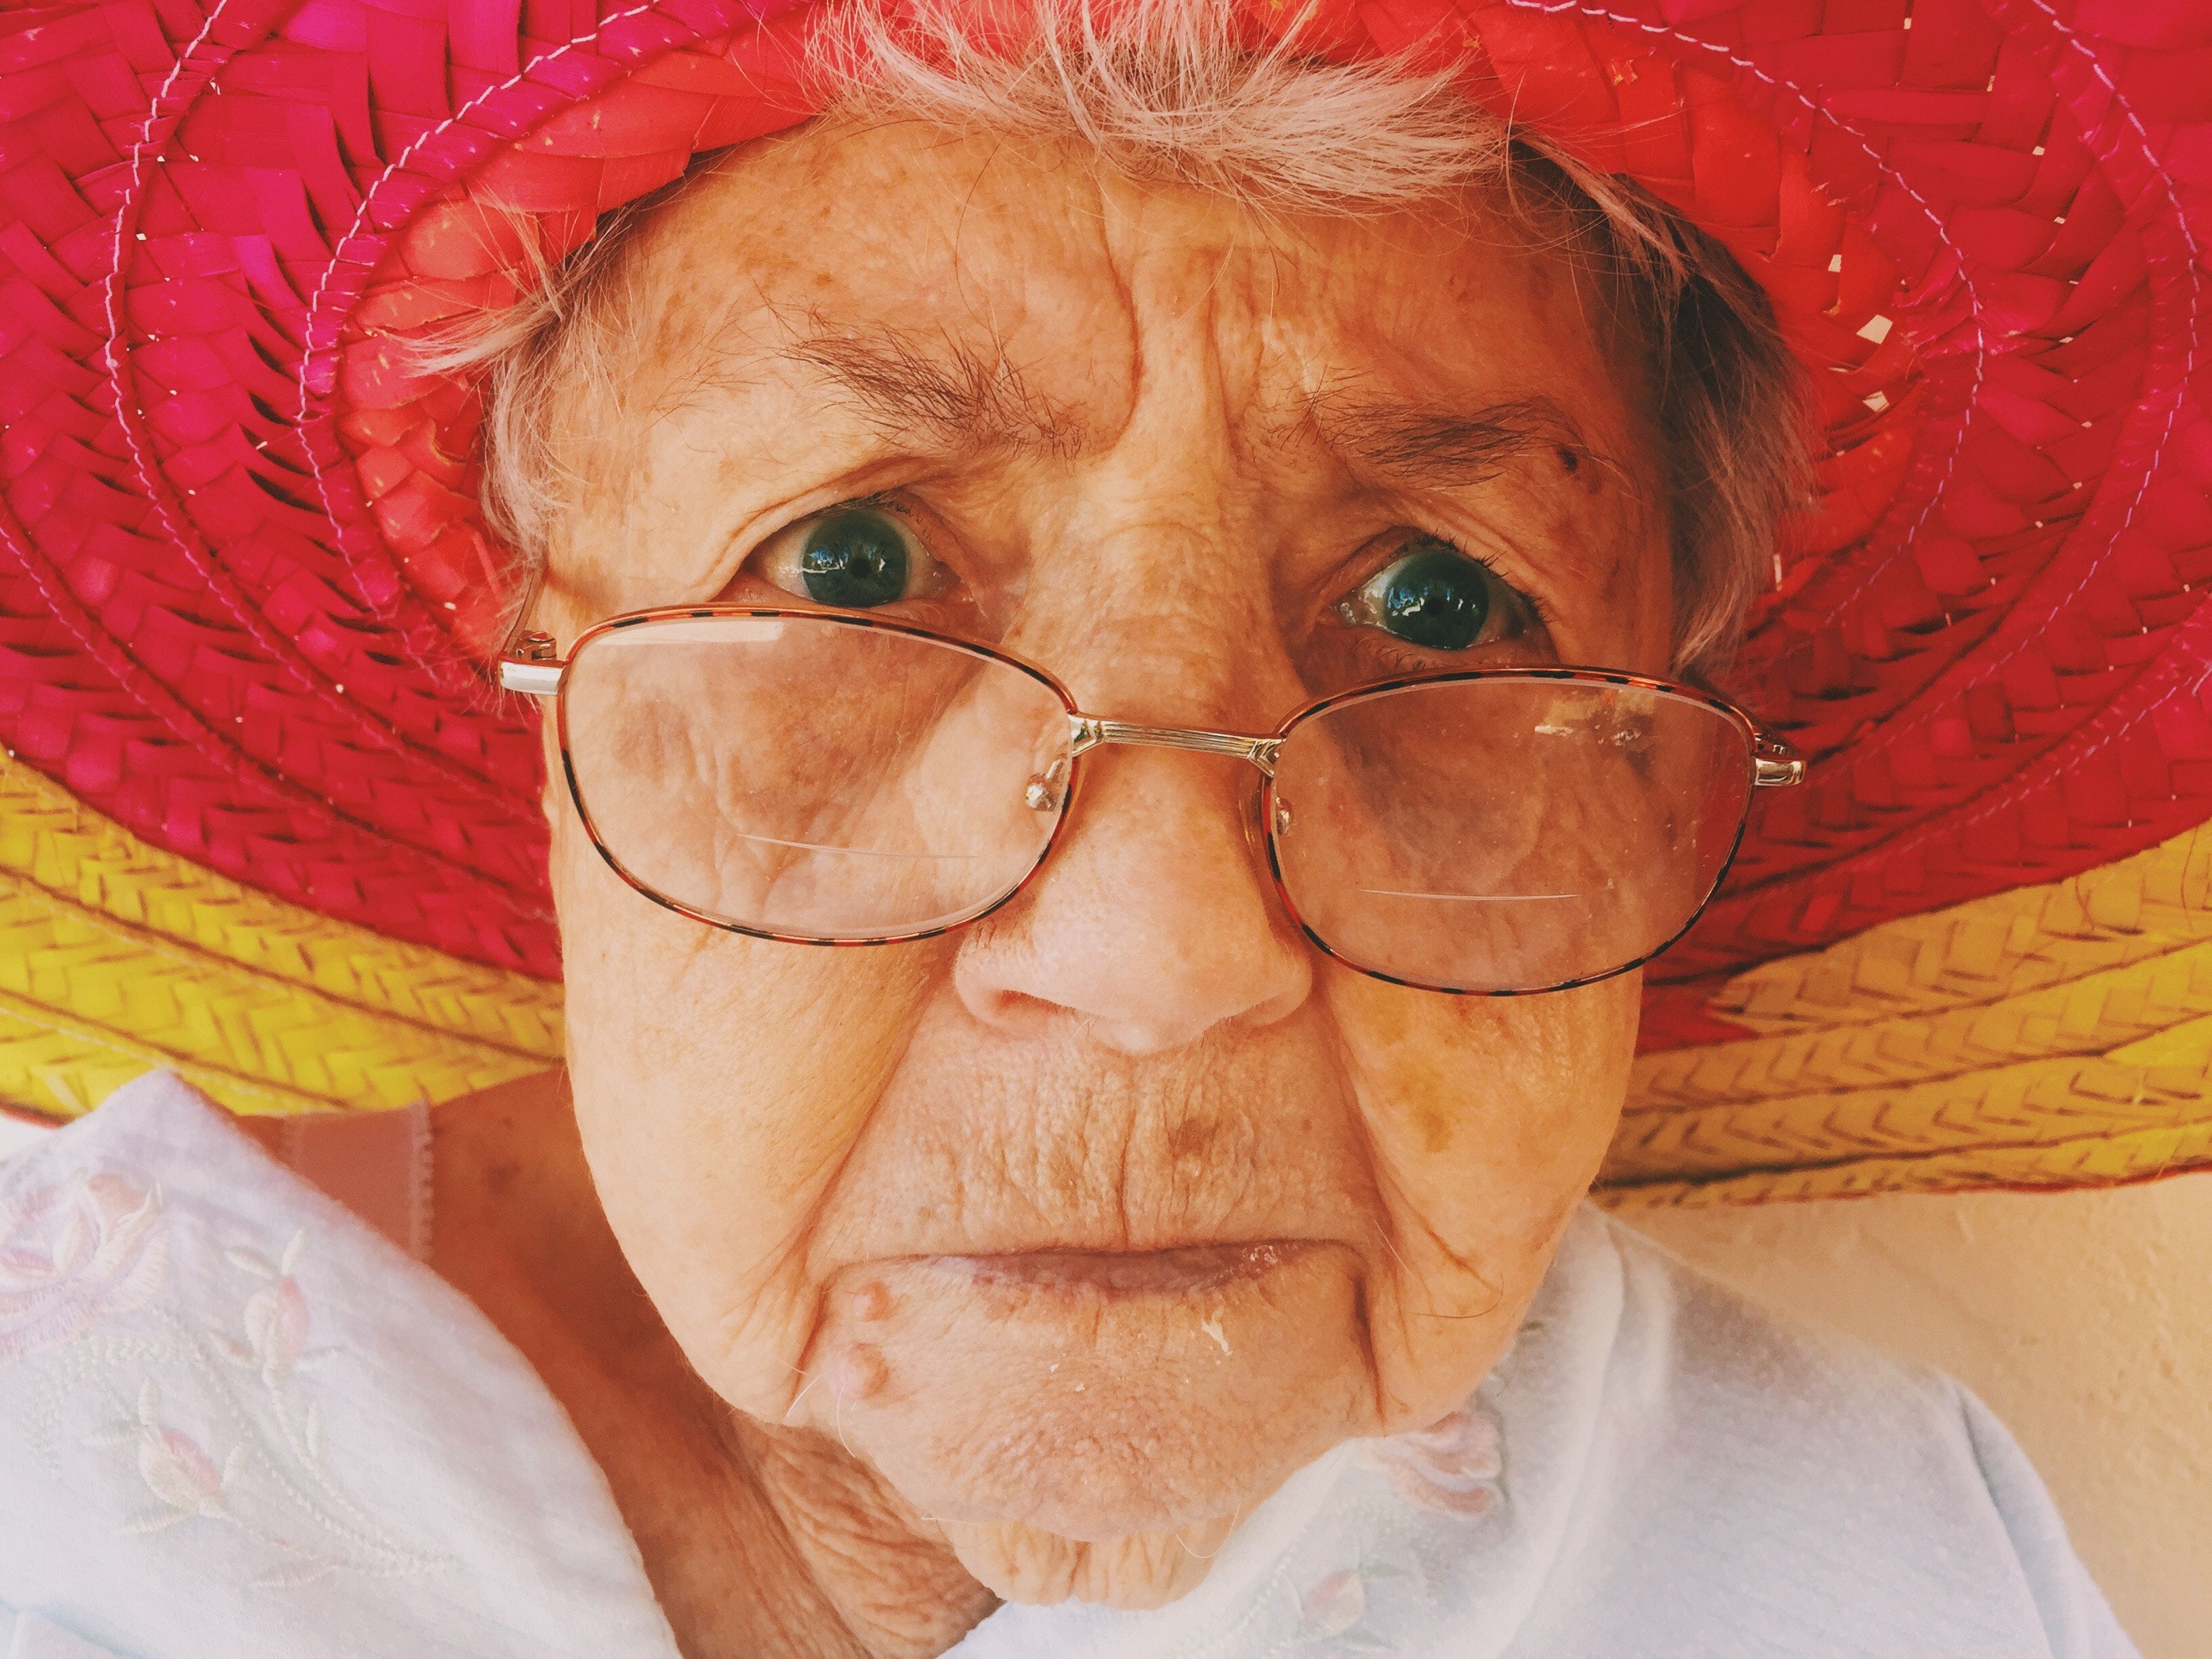 3264x2448 hat, person, grand mother, elderly, woman with glass, adult, glass, grandma, wrinkle, expression, aged, granny, face, PNG image, eye, senior, old woman, portrait, woman, grand nanny, grandmother. Mocah.org HD